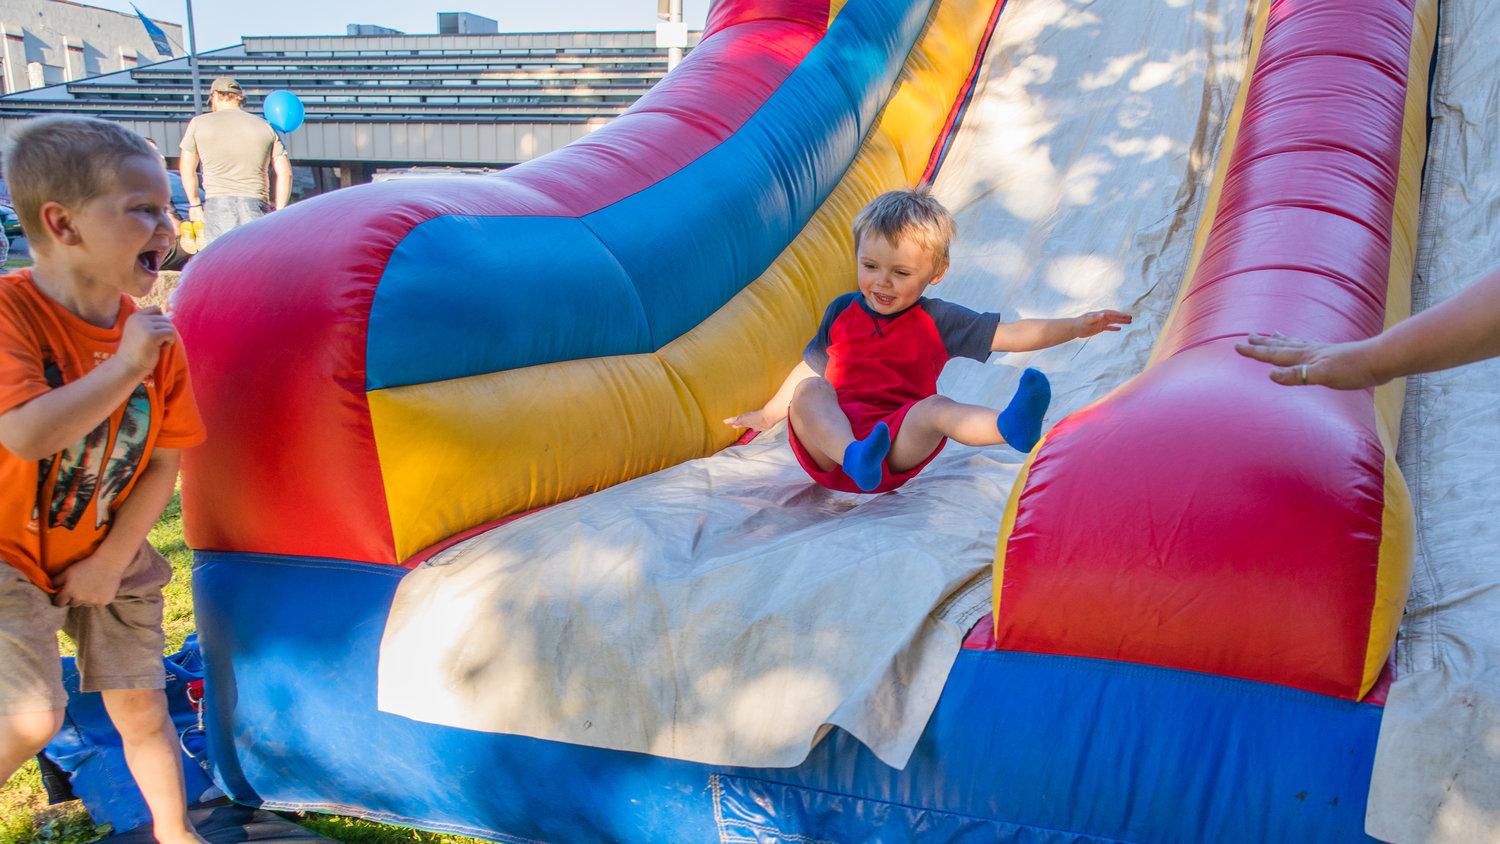 Greyson Driscoll, 3, bounces down a slide Tuesday evening at George Washington Park in Centralia during a National Night Out event.